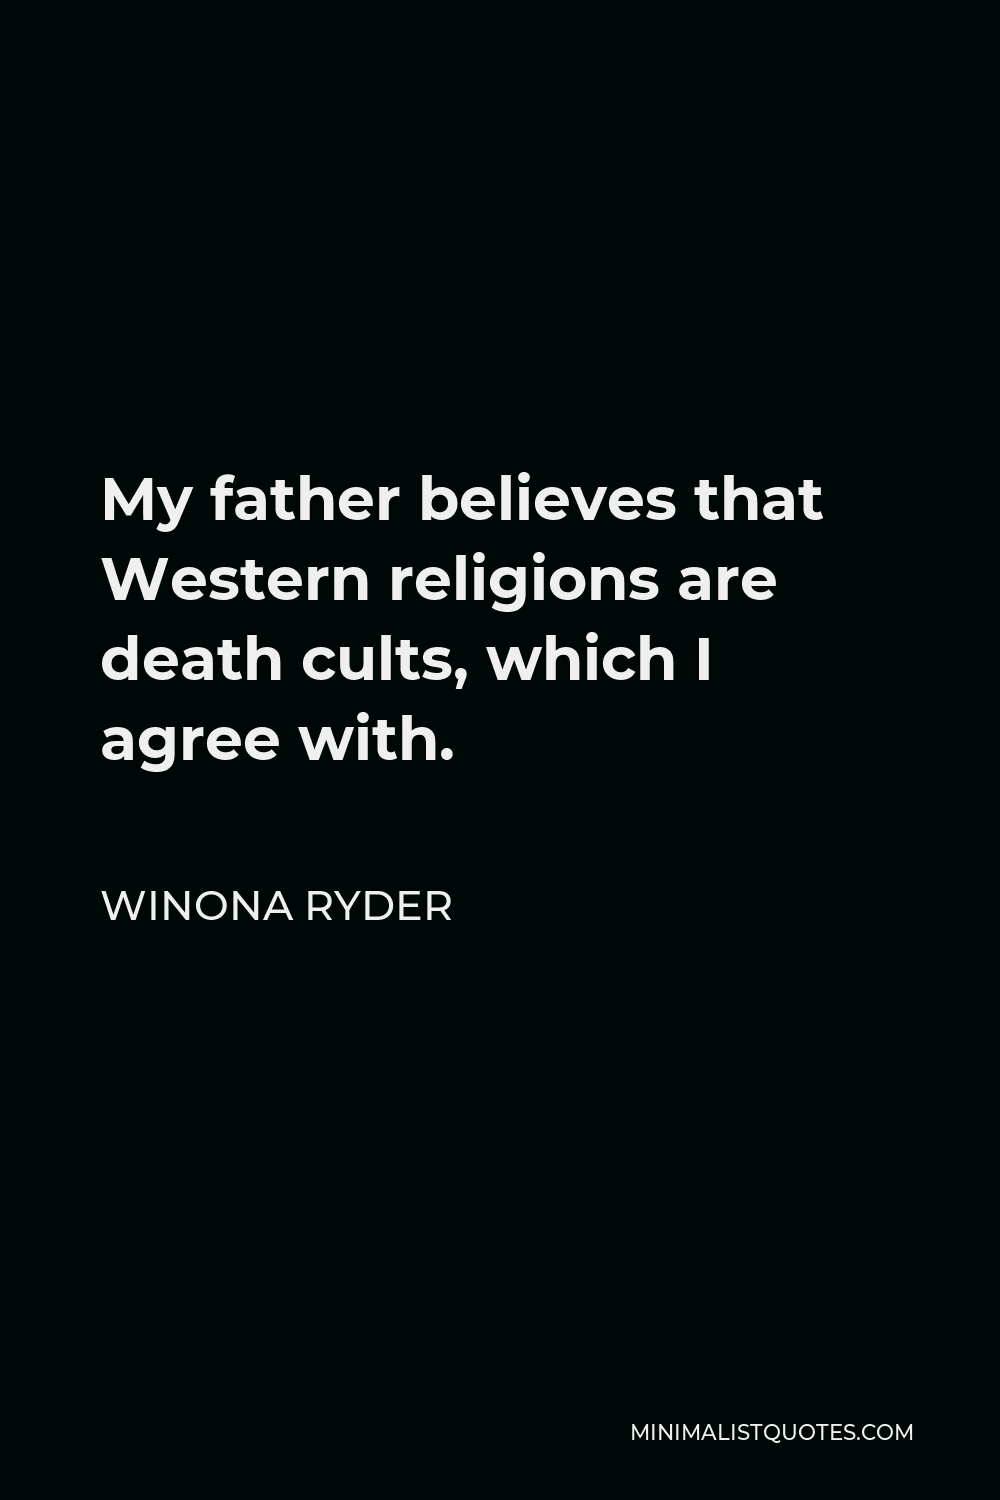 Winona Ryder Quote - My father believes that Western religions are death cults, which I agree with.